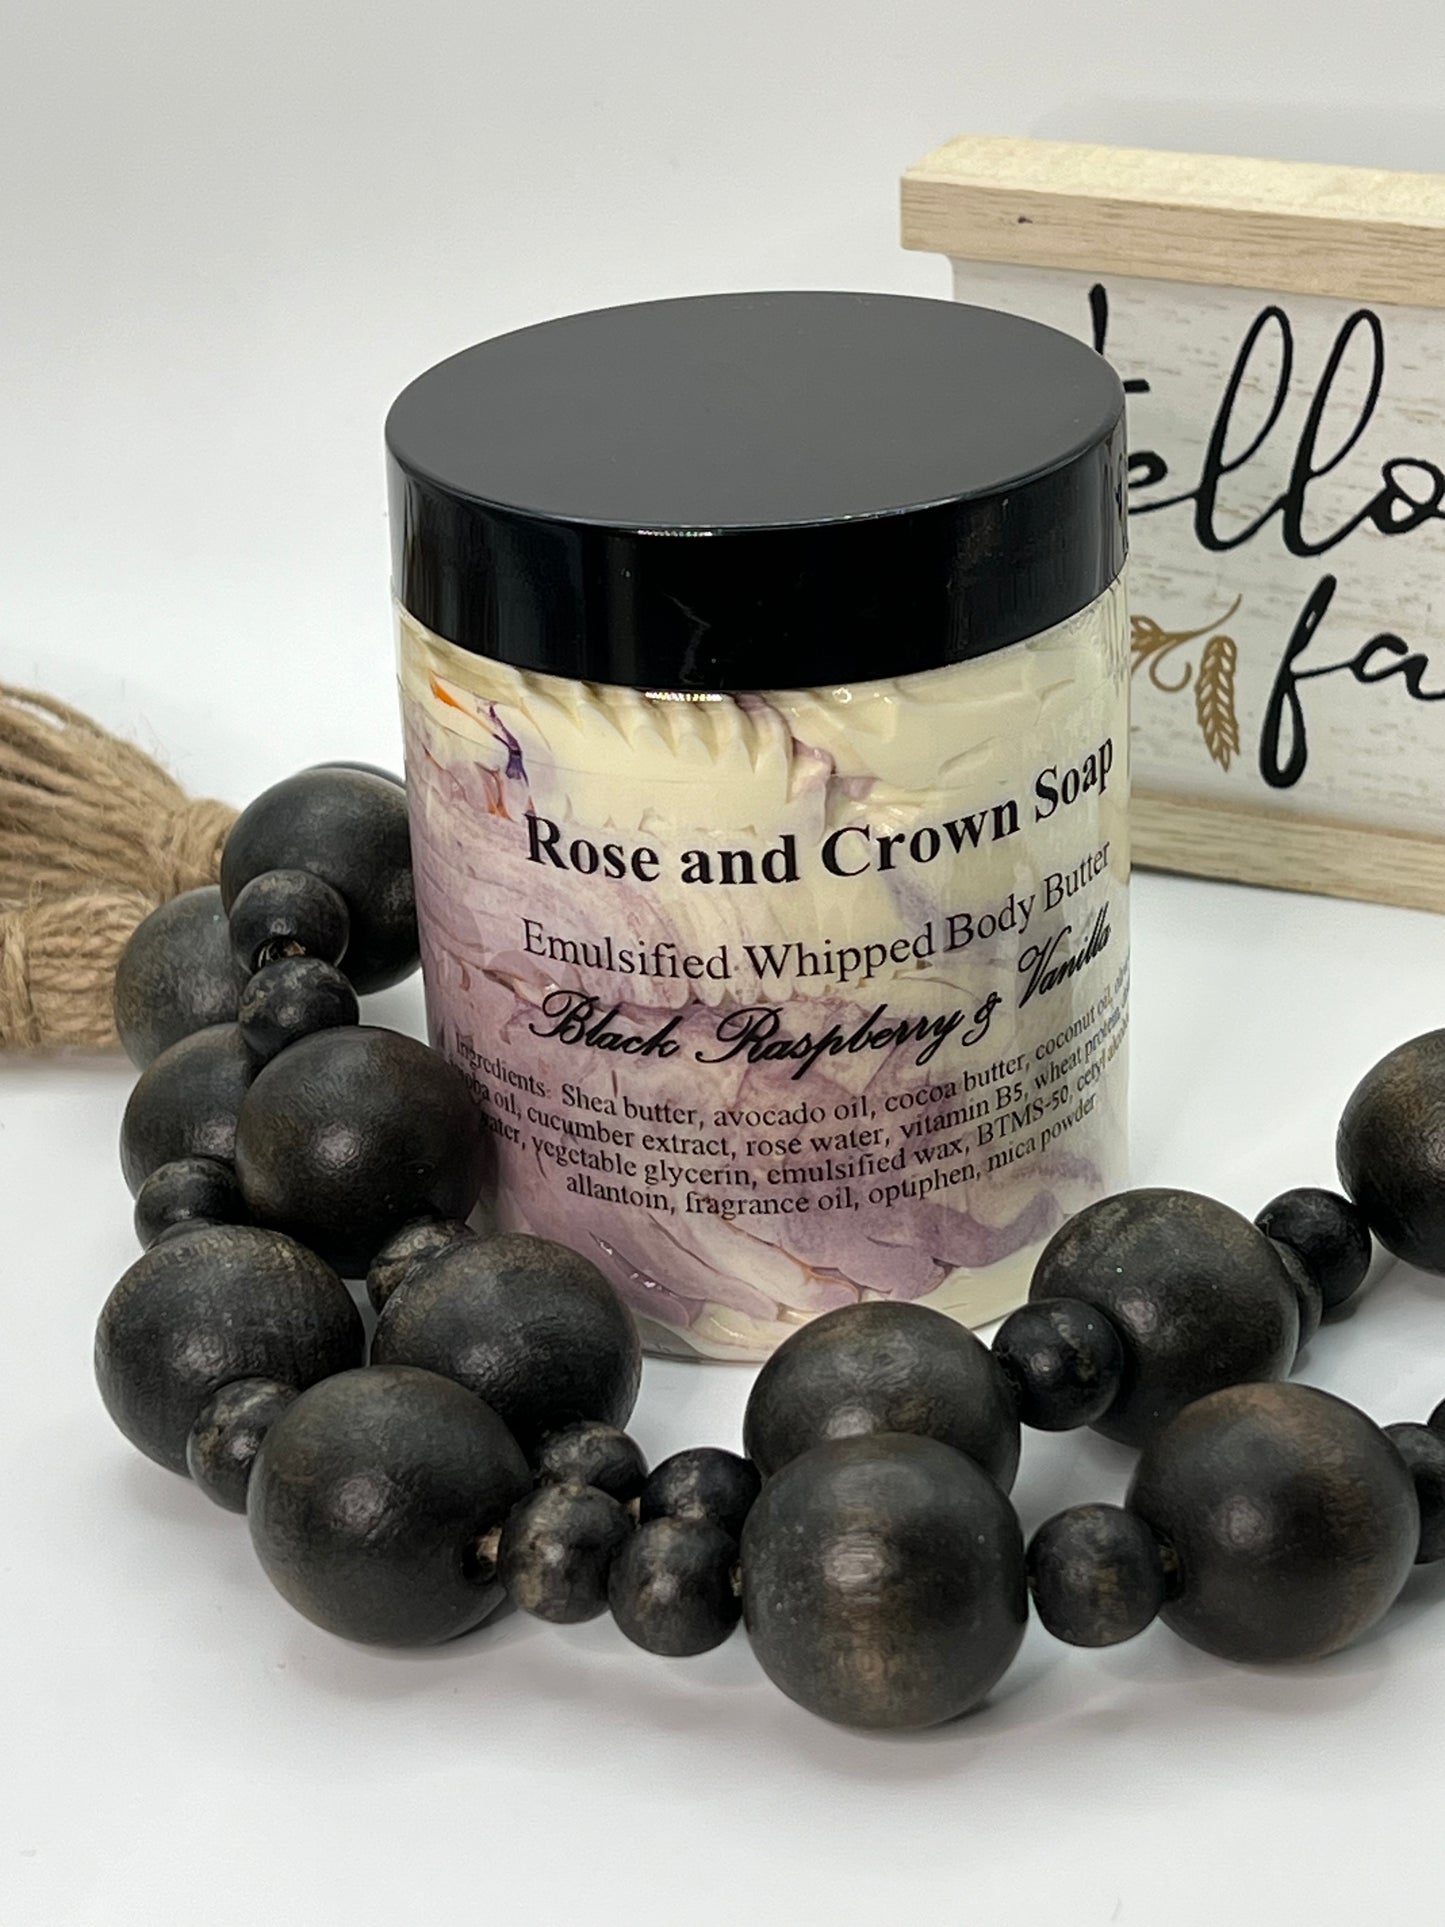 Emulsified & Whipped Body Butter - Black Raspberry and Vanilla